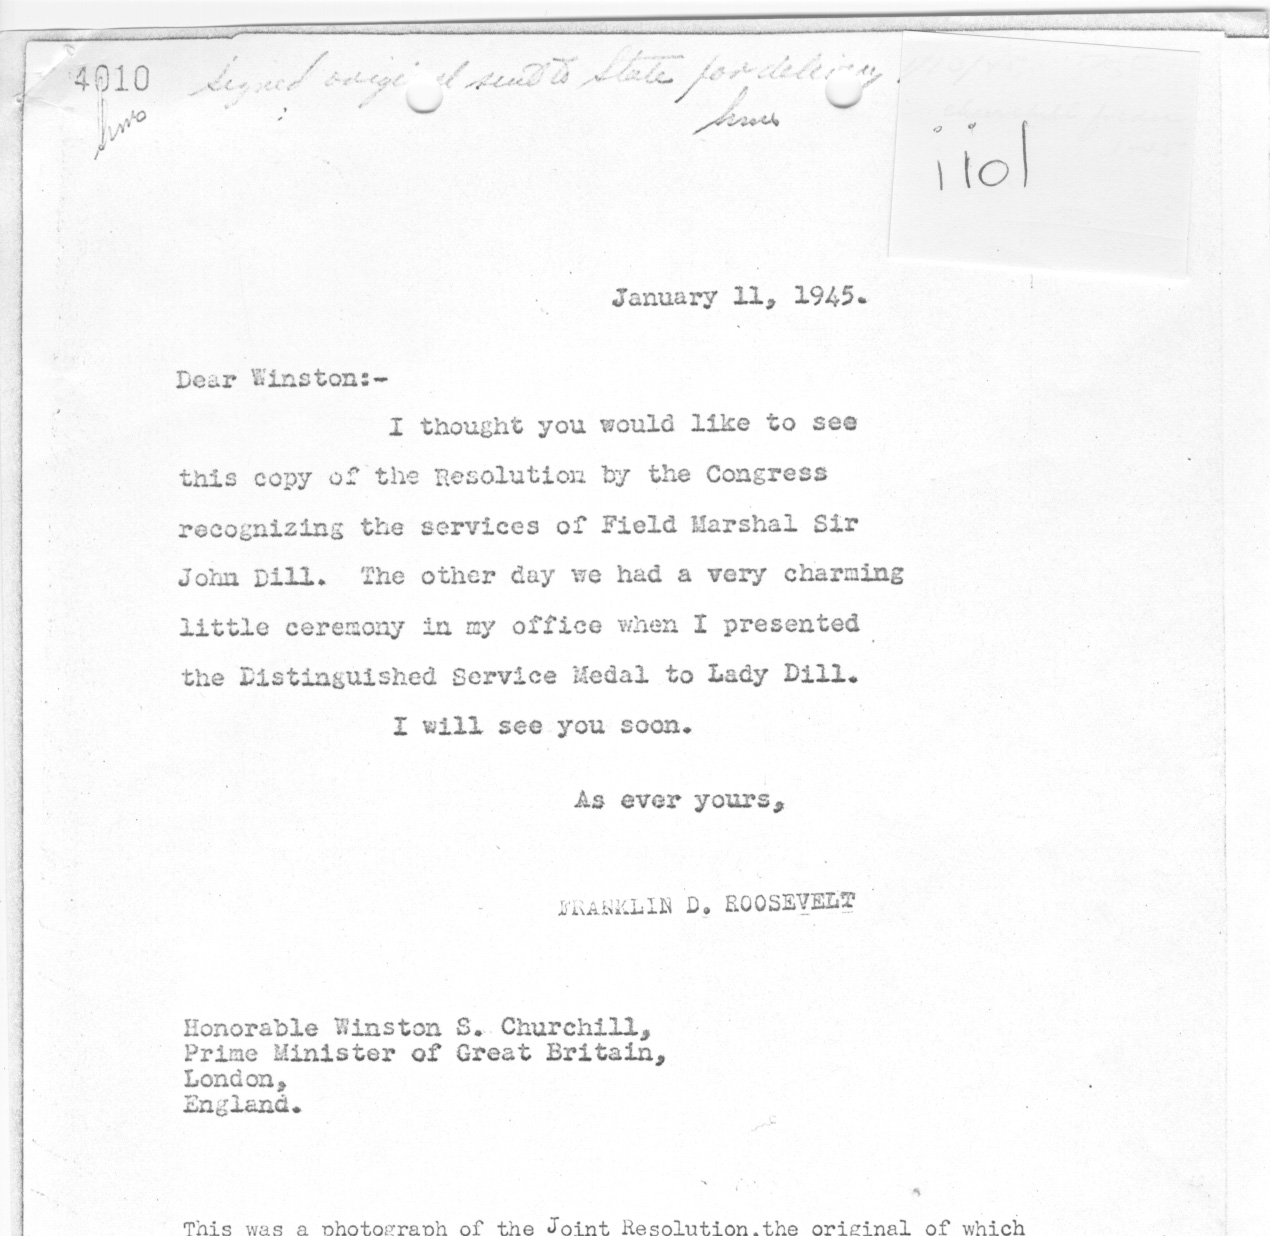 [a335ii01.jpg] - FDR --> Winston Churchill re: ceremony presenting Distinguished Medal to Lady Dill 1/11/45